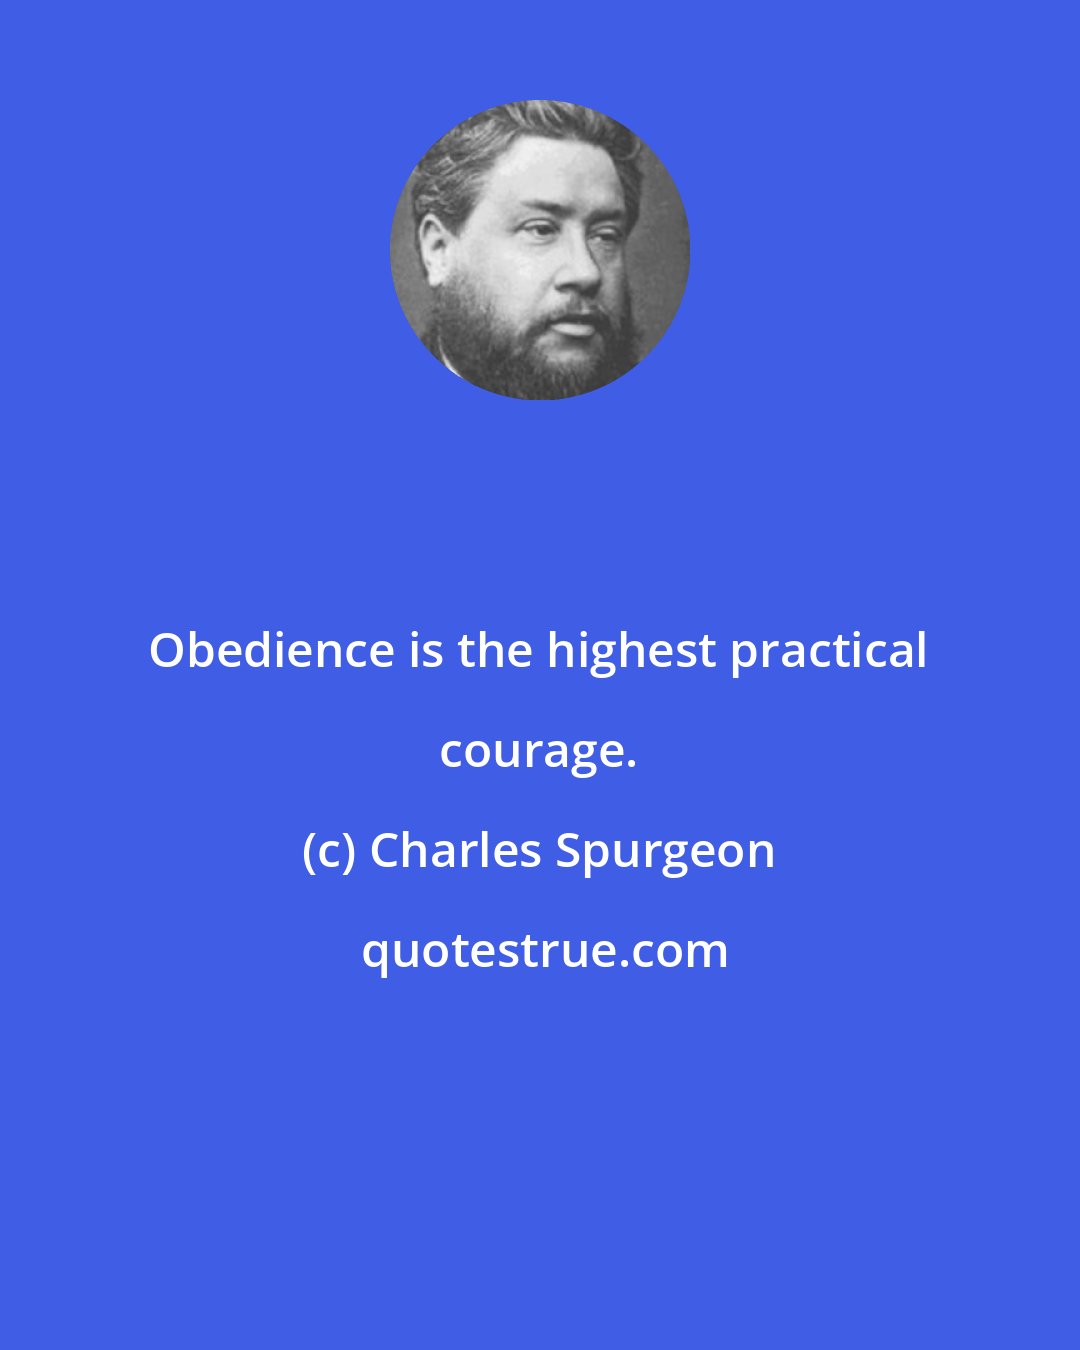 Charles Spurgeon: Obedience is the highest practical courage.